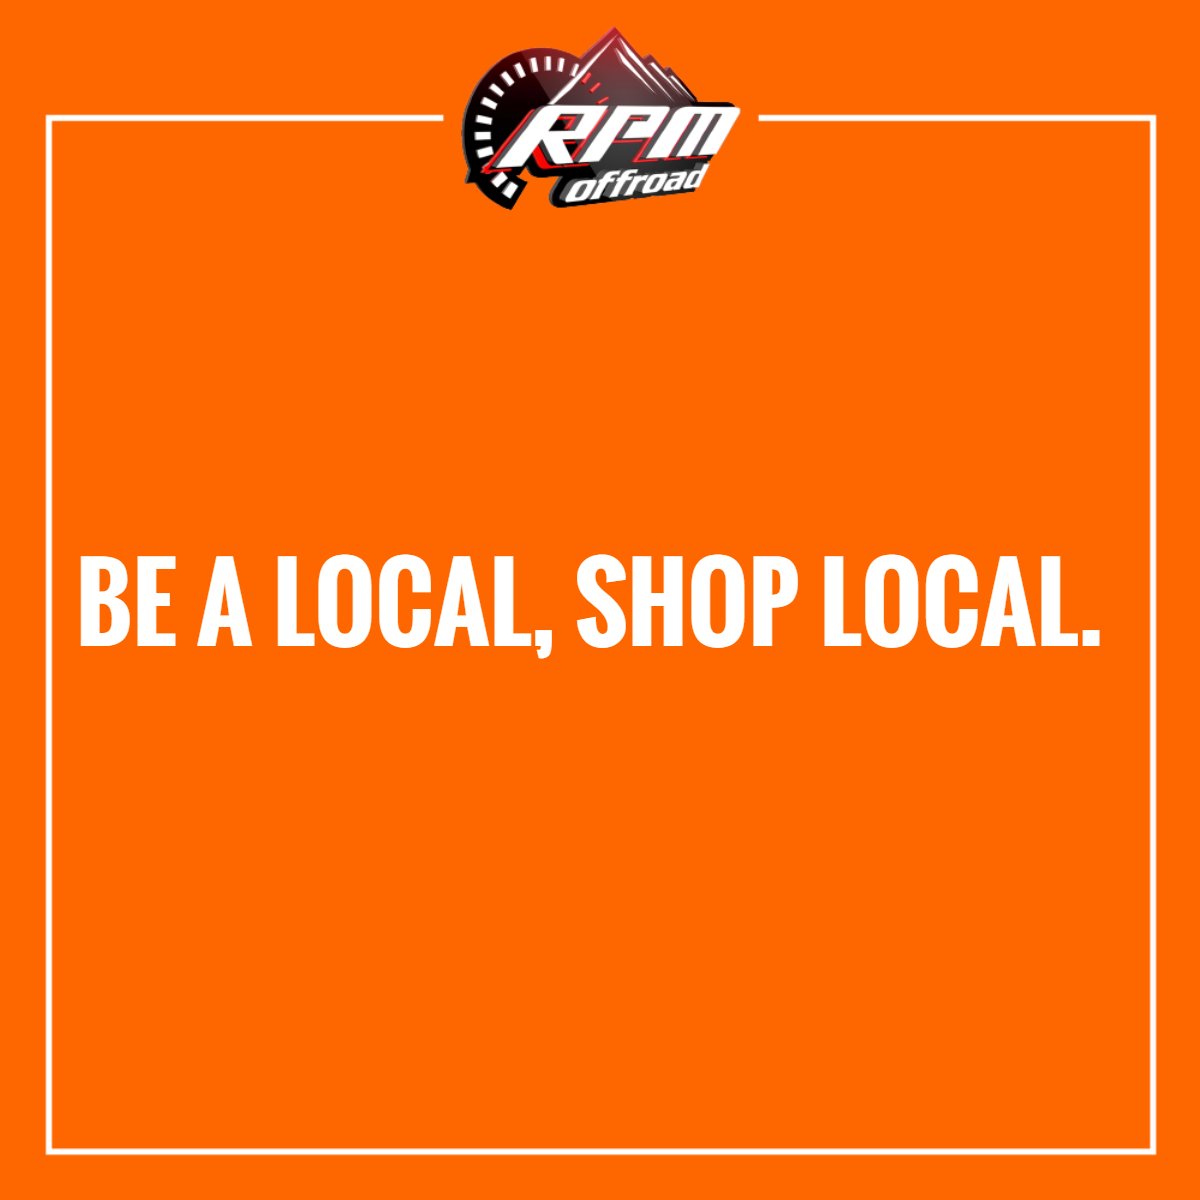 We know you have plenty of options to choose from as you shop, spend, and dine this holiday season, which is why we wanted to let you know how much we appreciate your support. Shopping local means that the money you spend stays in your community, and we think that's a win-win.